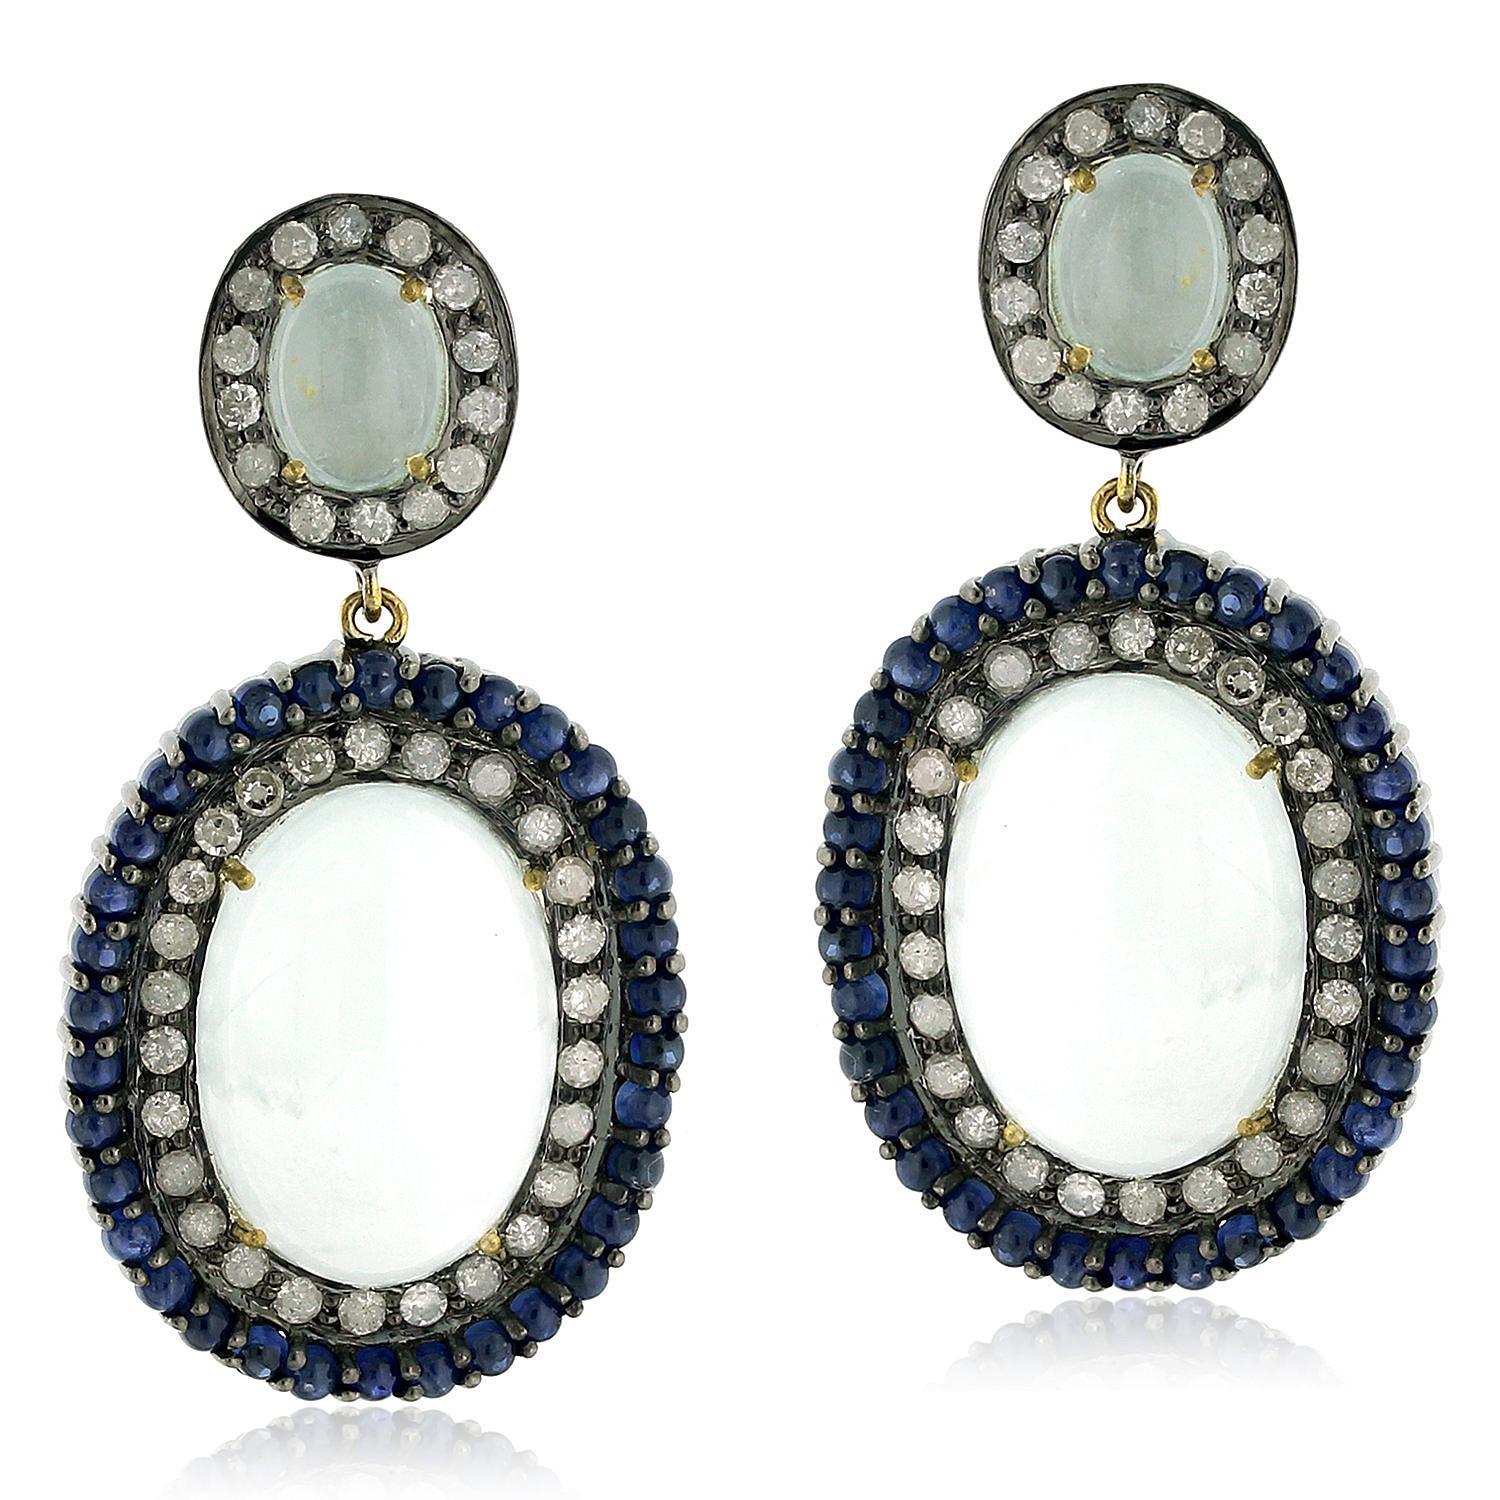 Mixed Cut Oval Shaped Agate Earring Surrounded by Blue Sapphire & Diamonds in Pave Setting For Sale